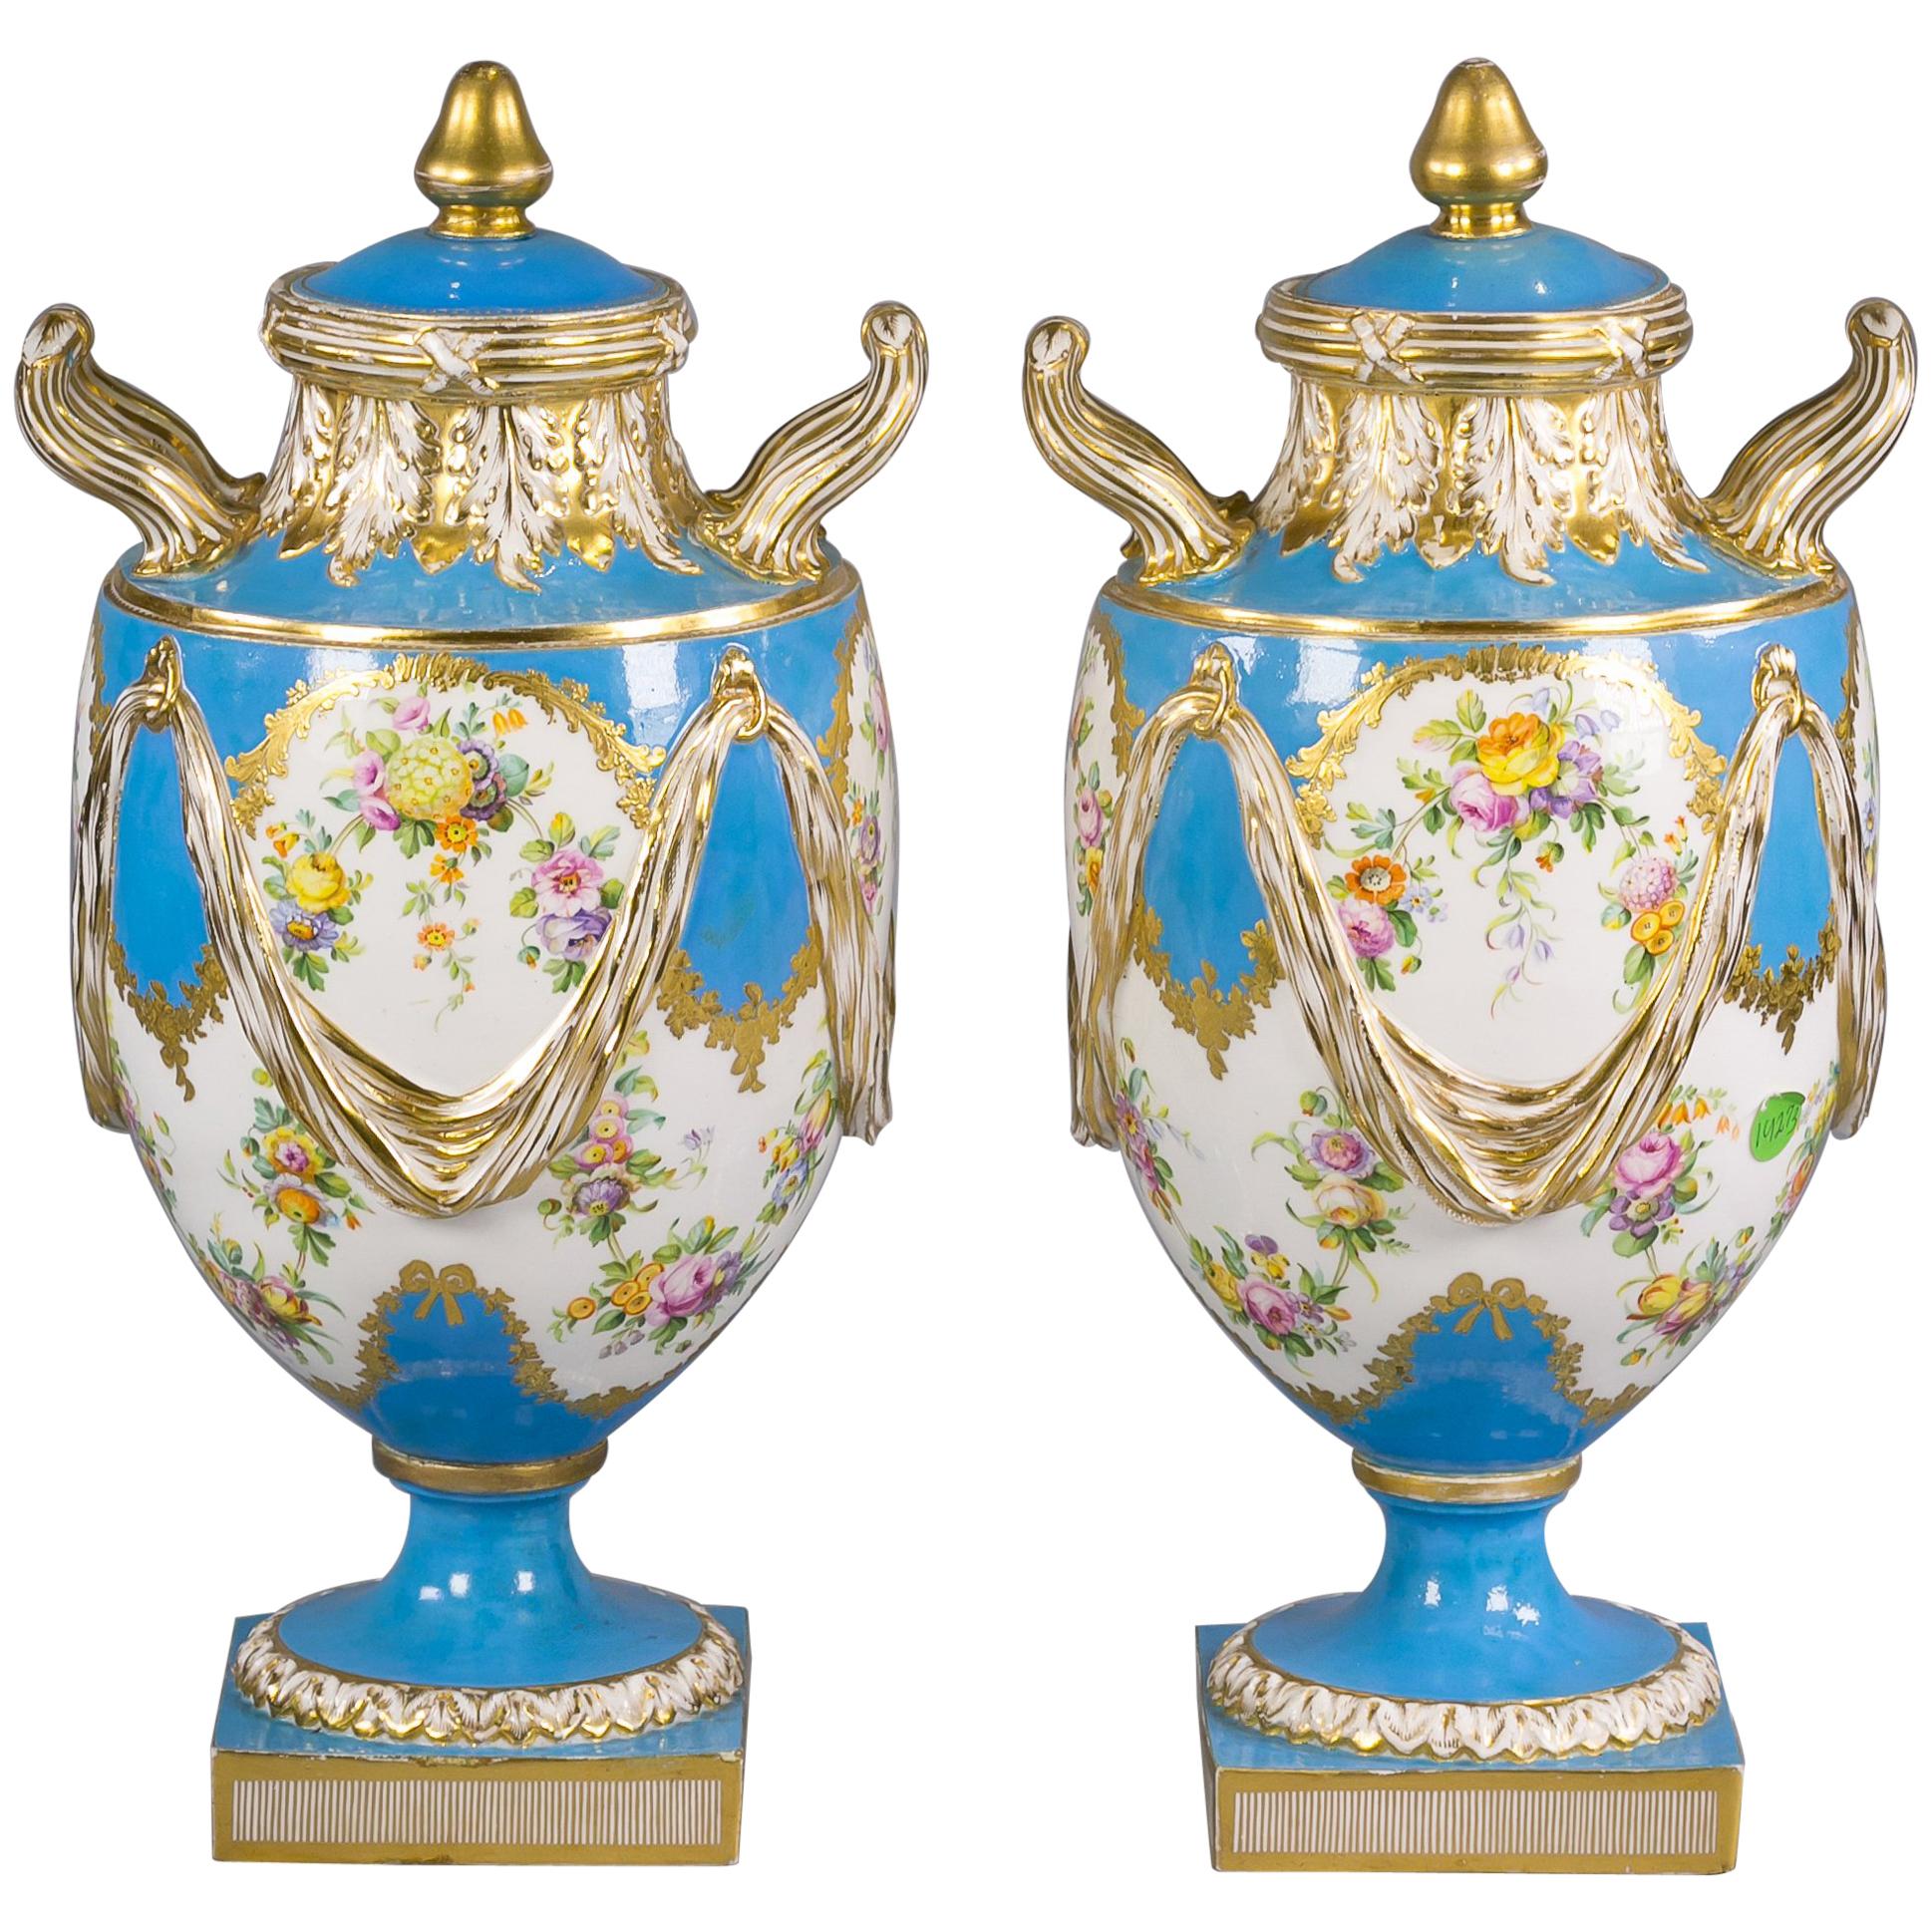 Pair of English Porcelain Two Handled Covered Vases, circa 1850